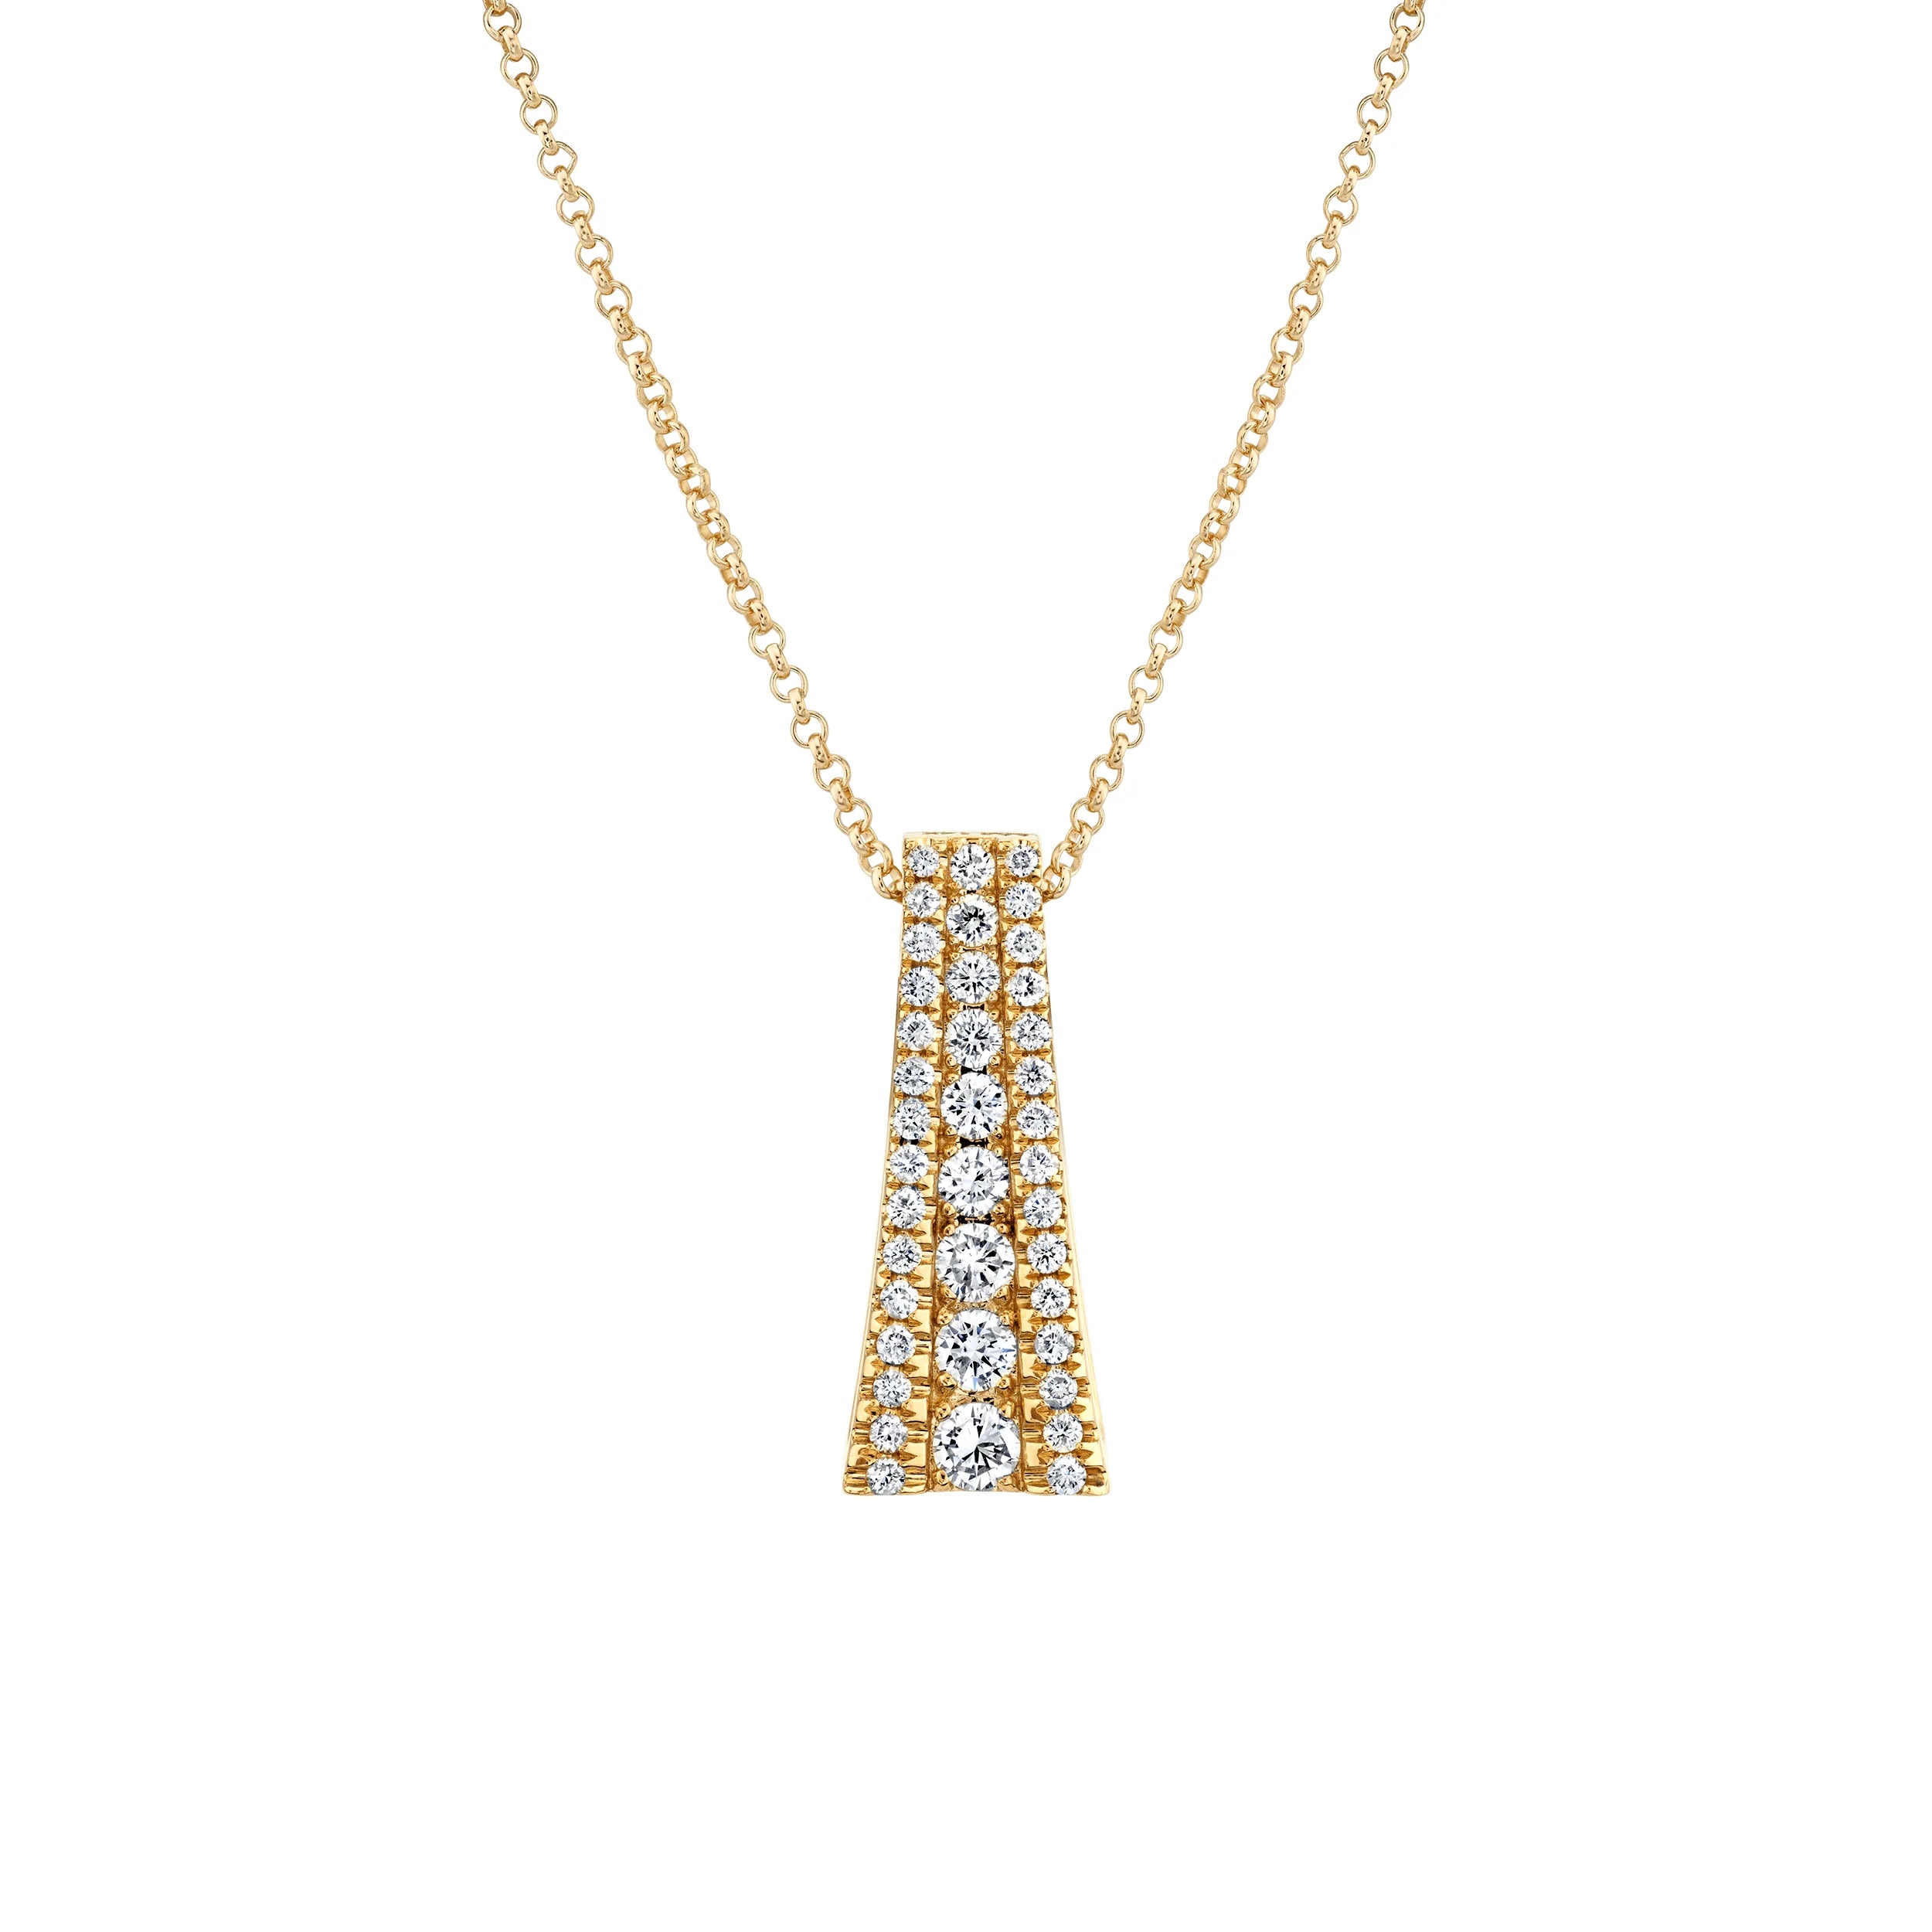 MICHAEL M Necklaces 14K Yellow Gold Europa Flare Pendant P398